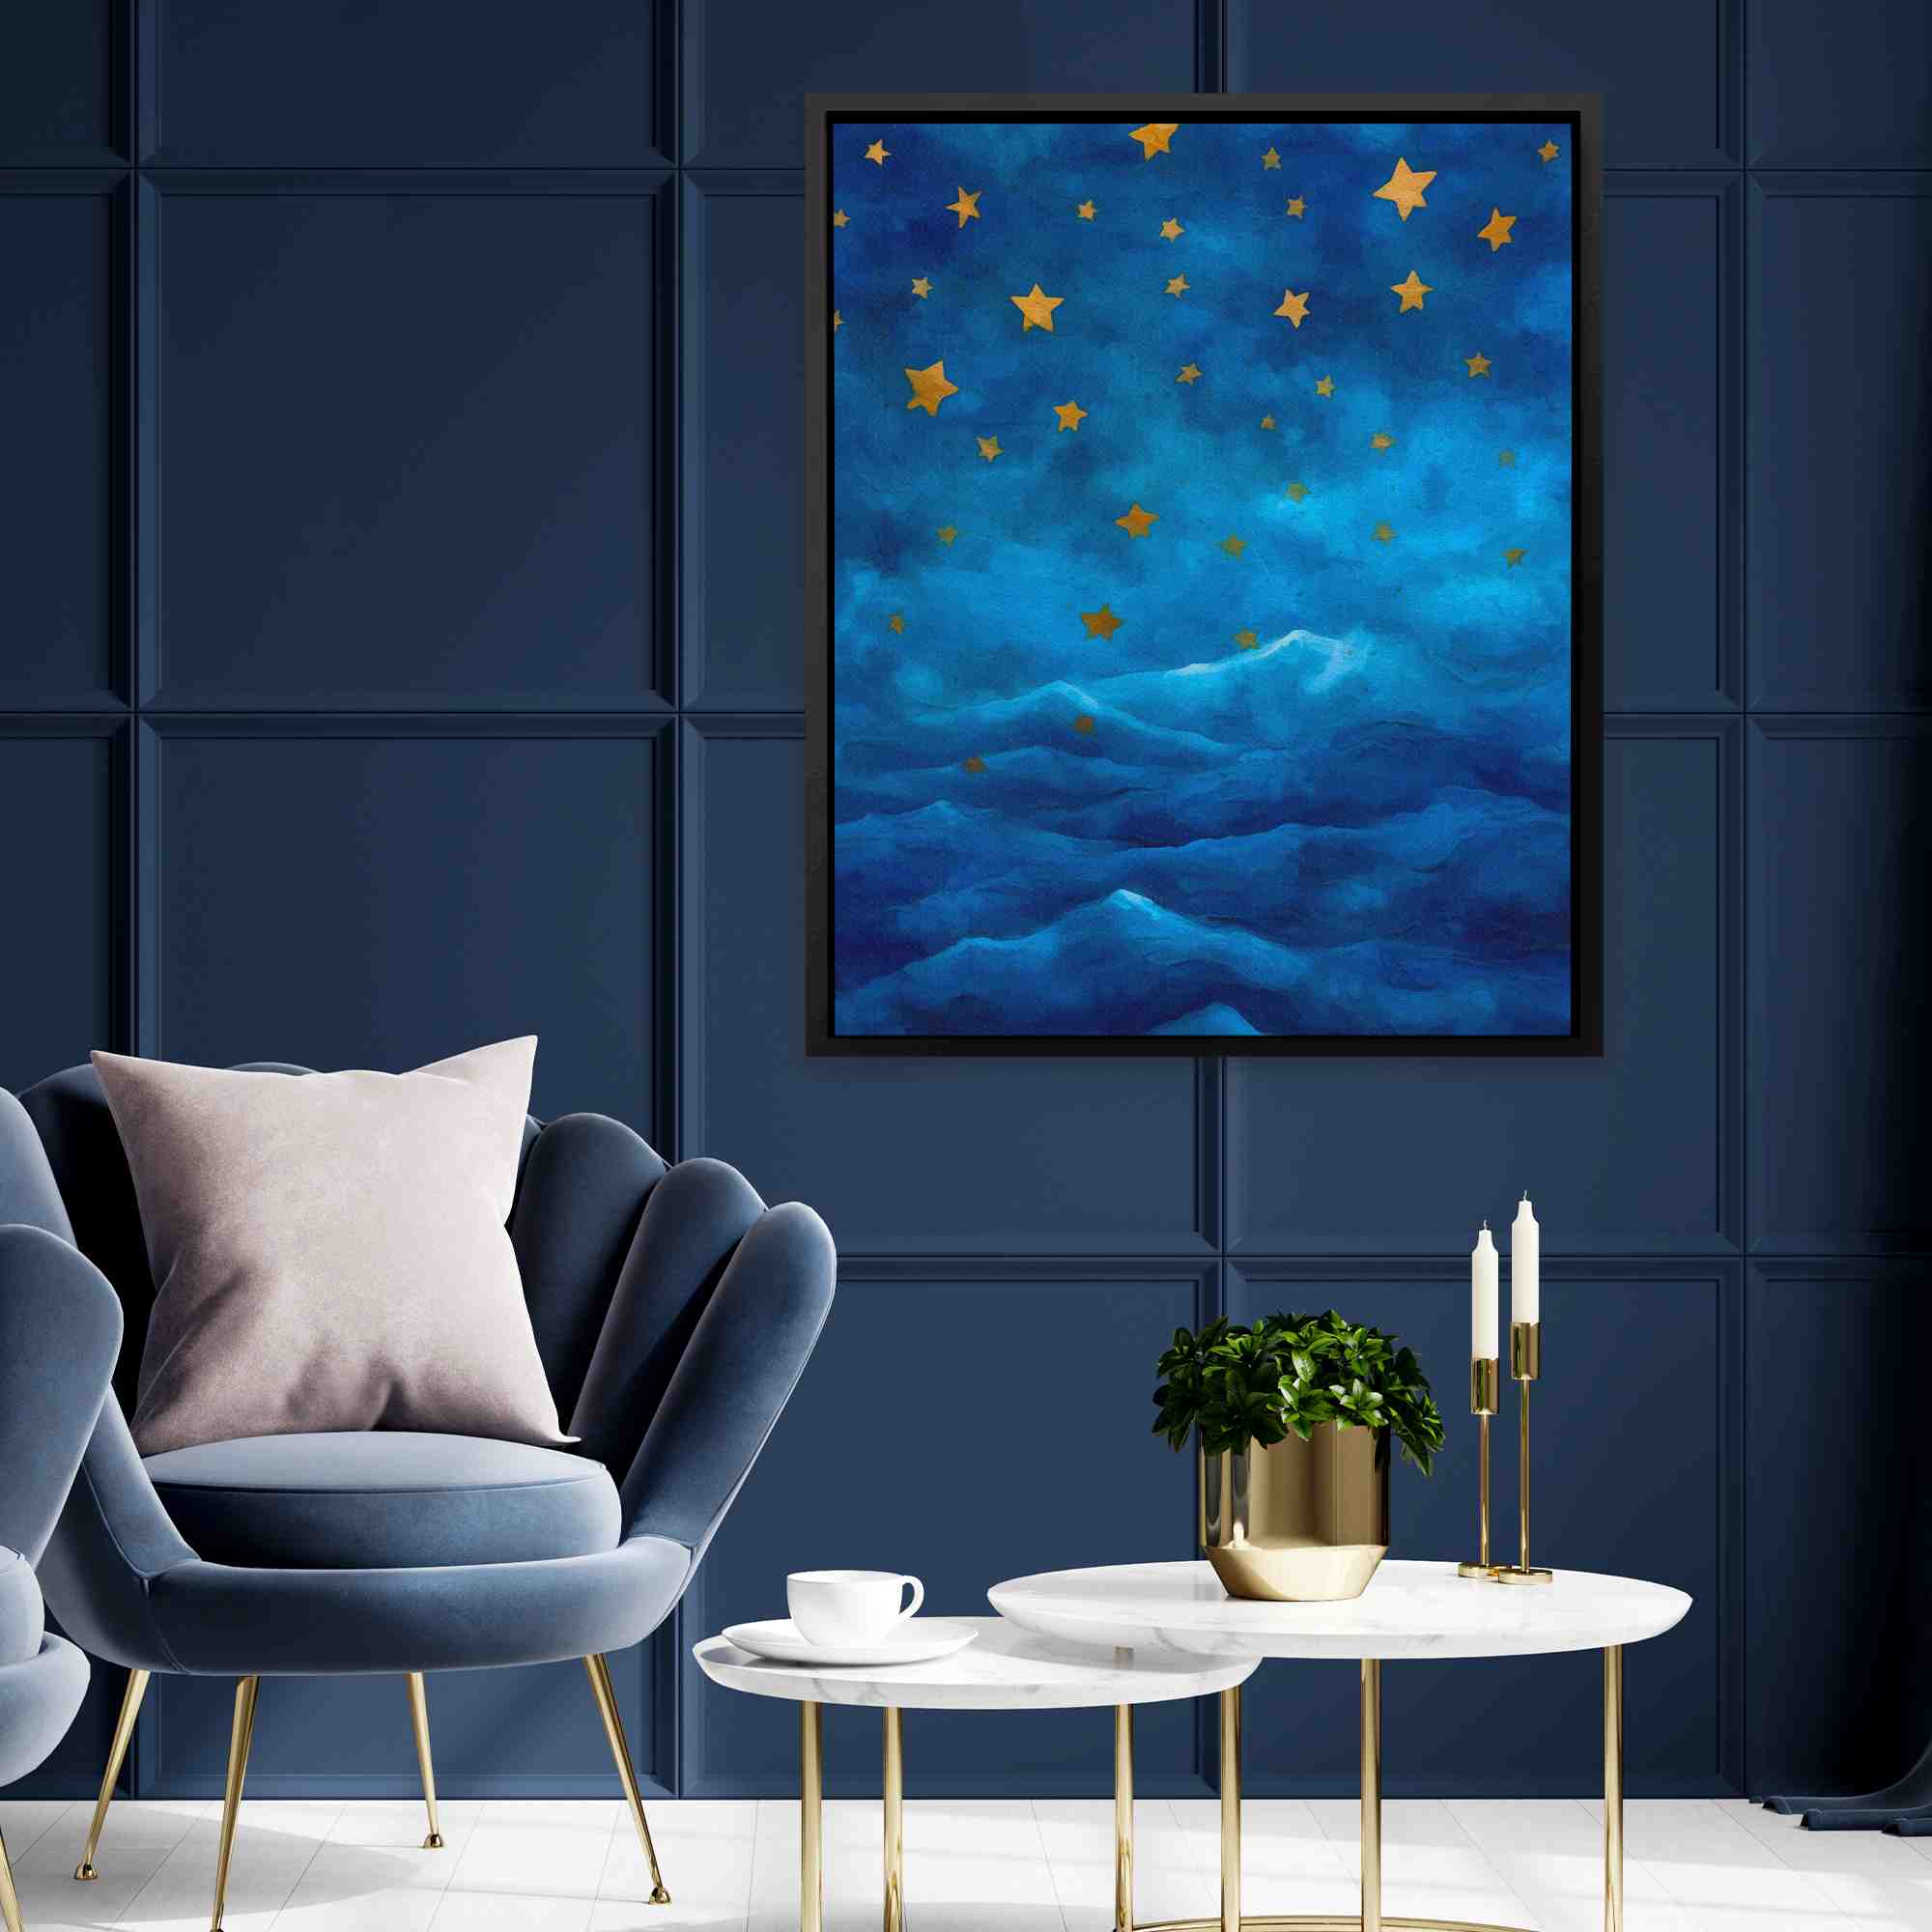 a painting of a night sky with gold stars